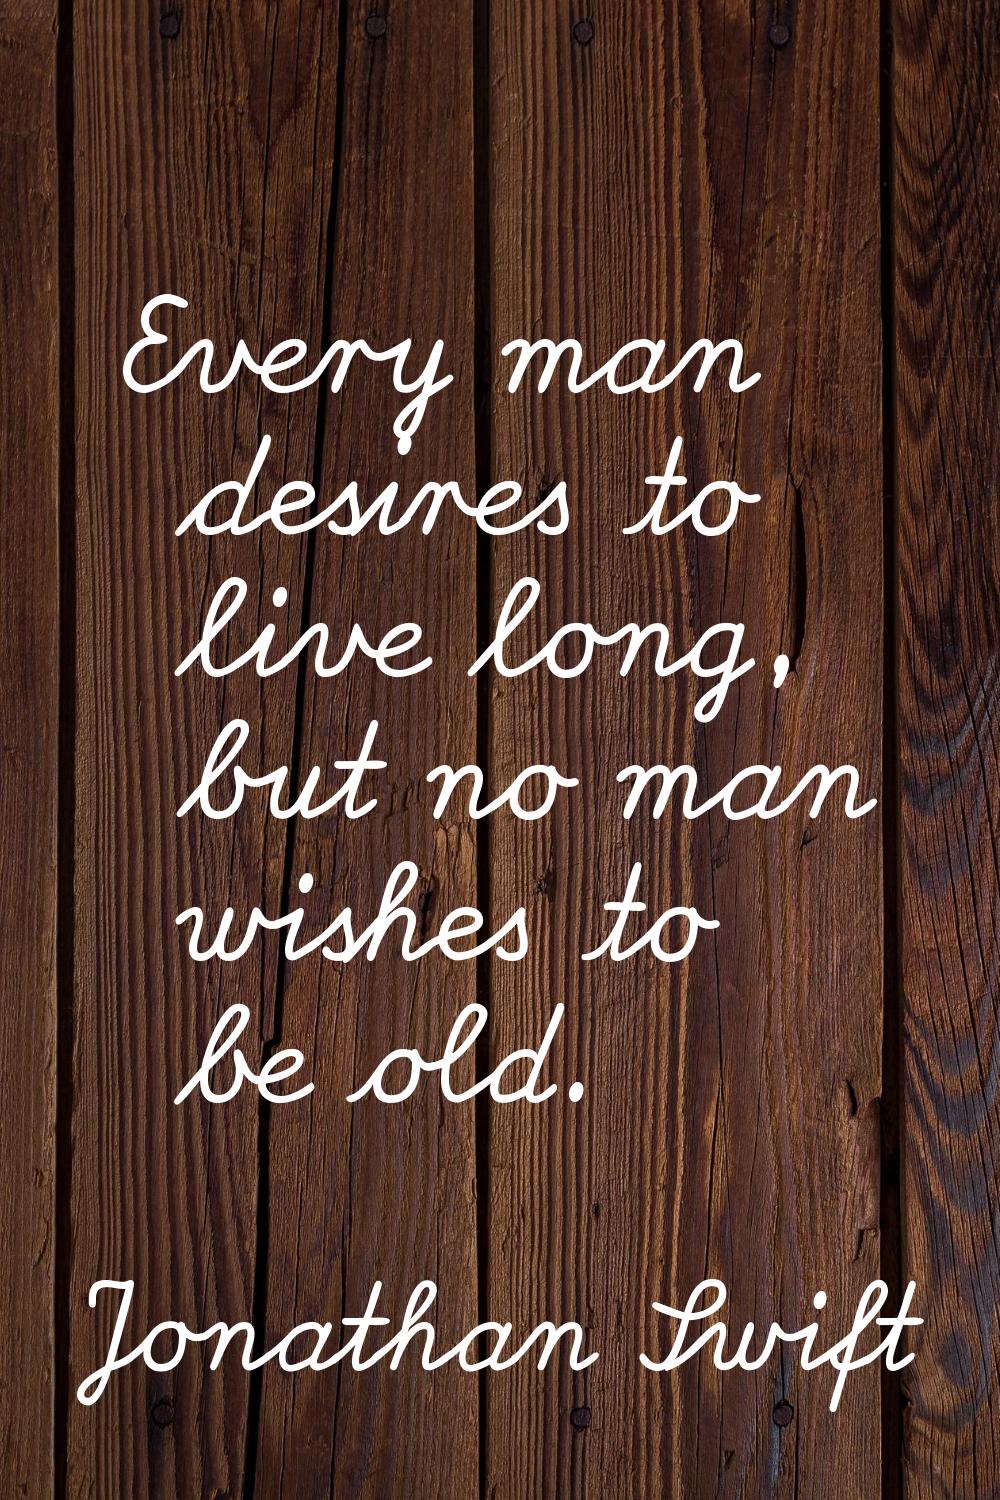 Every man desires to live long, but no man wishes to be old.